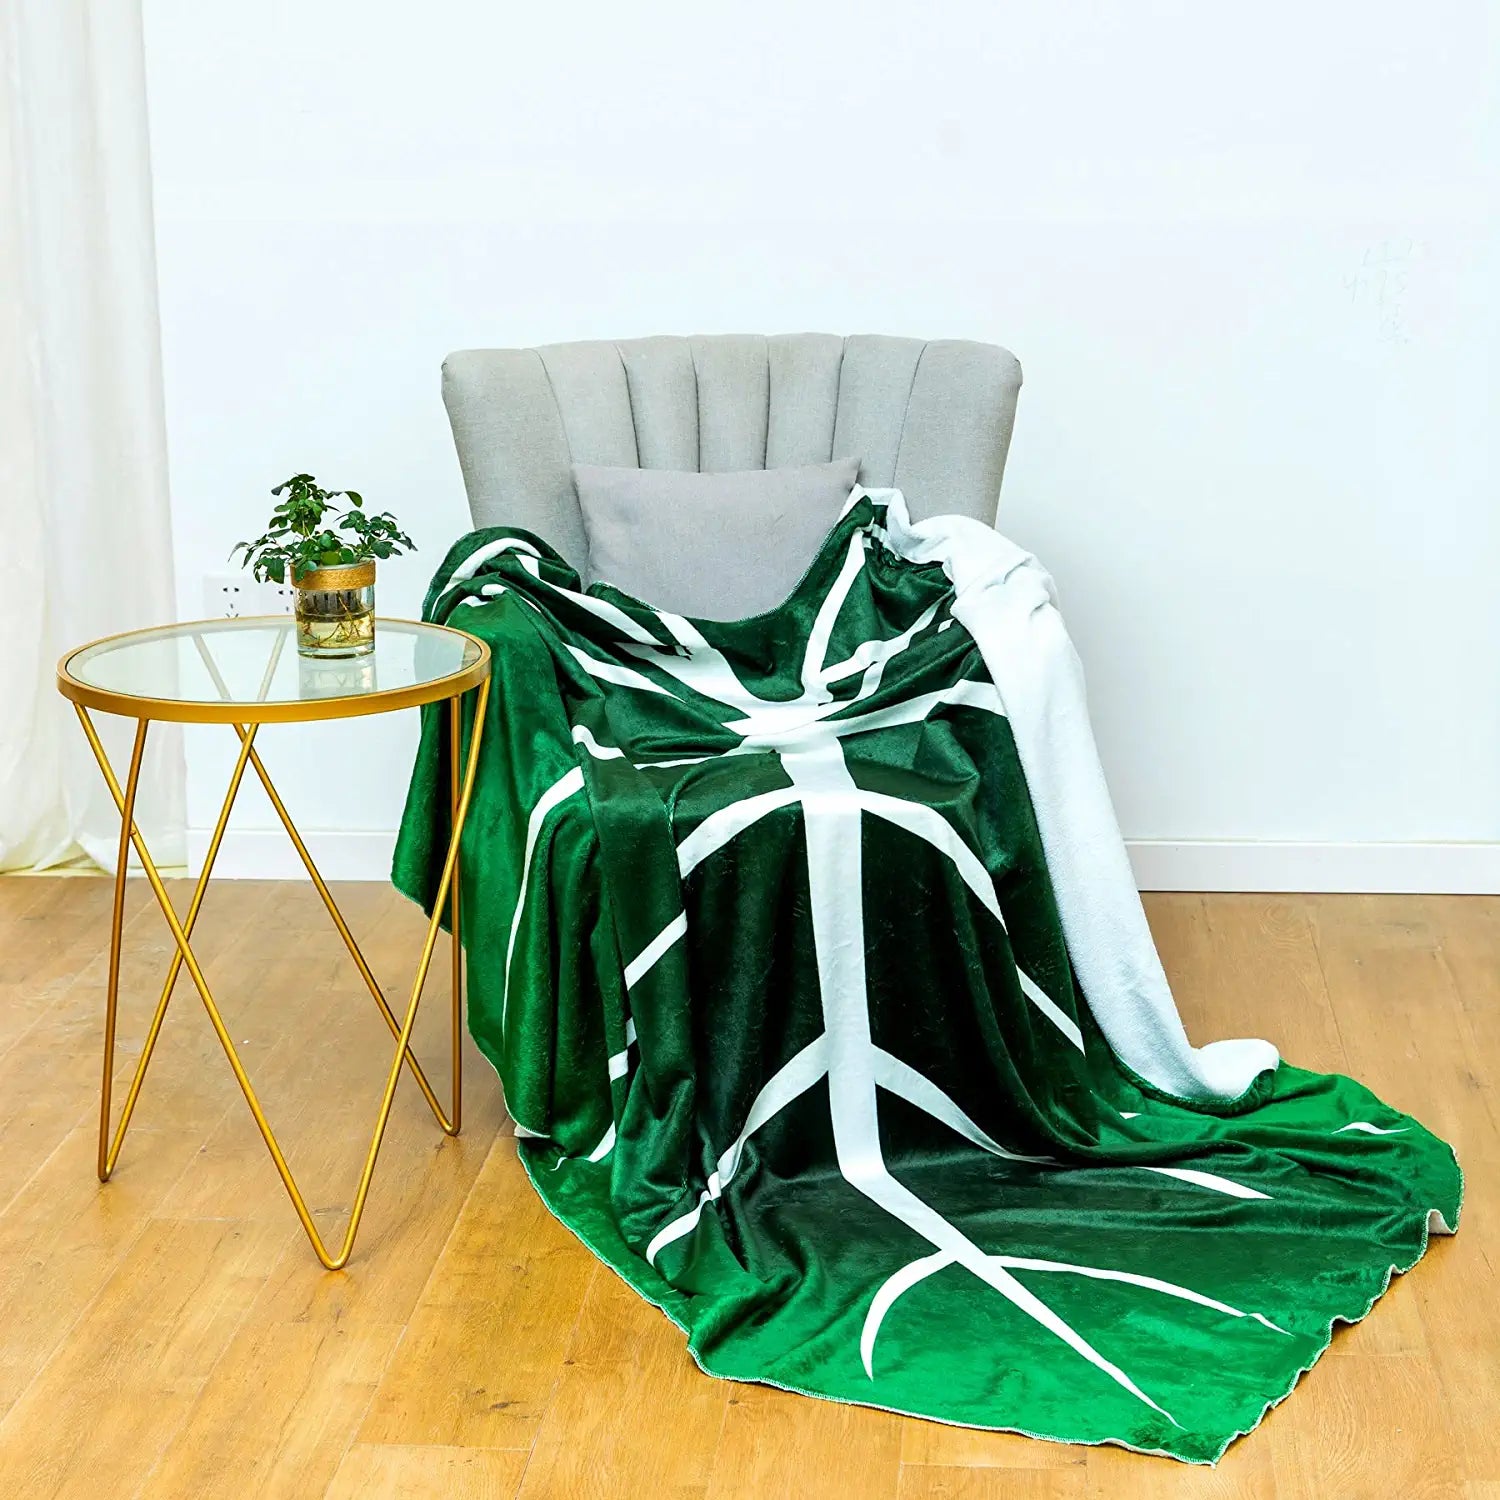 A green and white blanket shaped like a giant leaf draped over a grey chair.